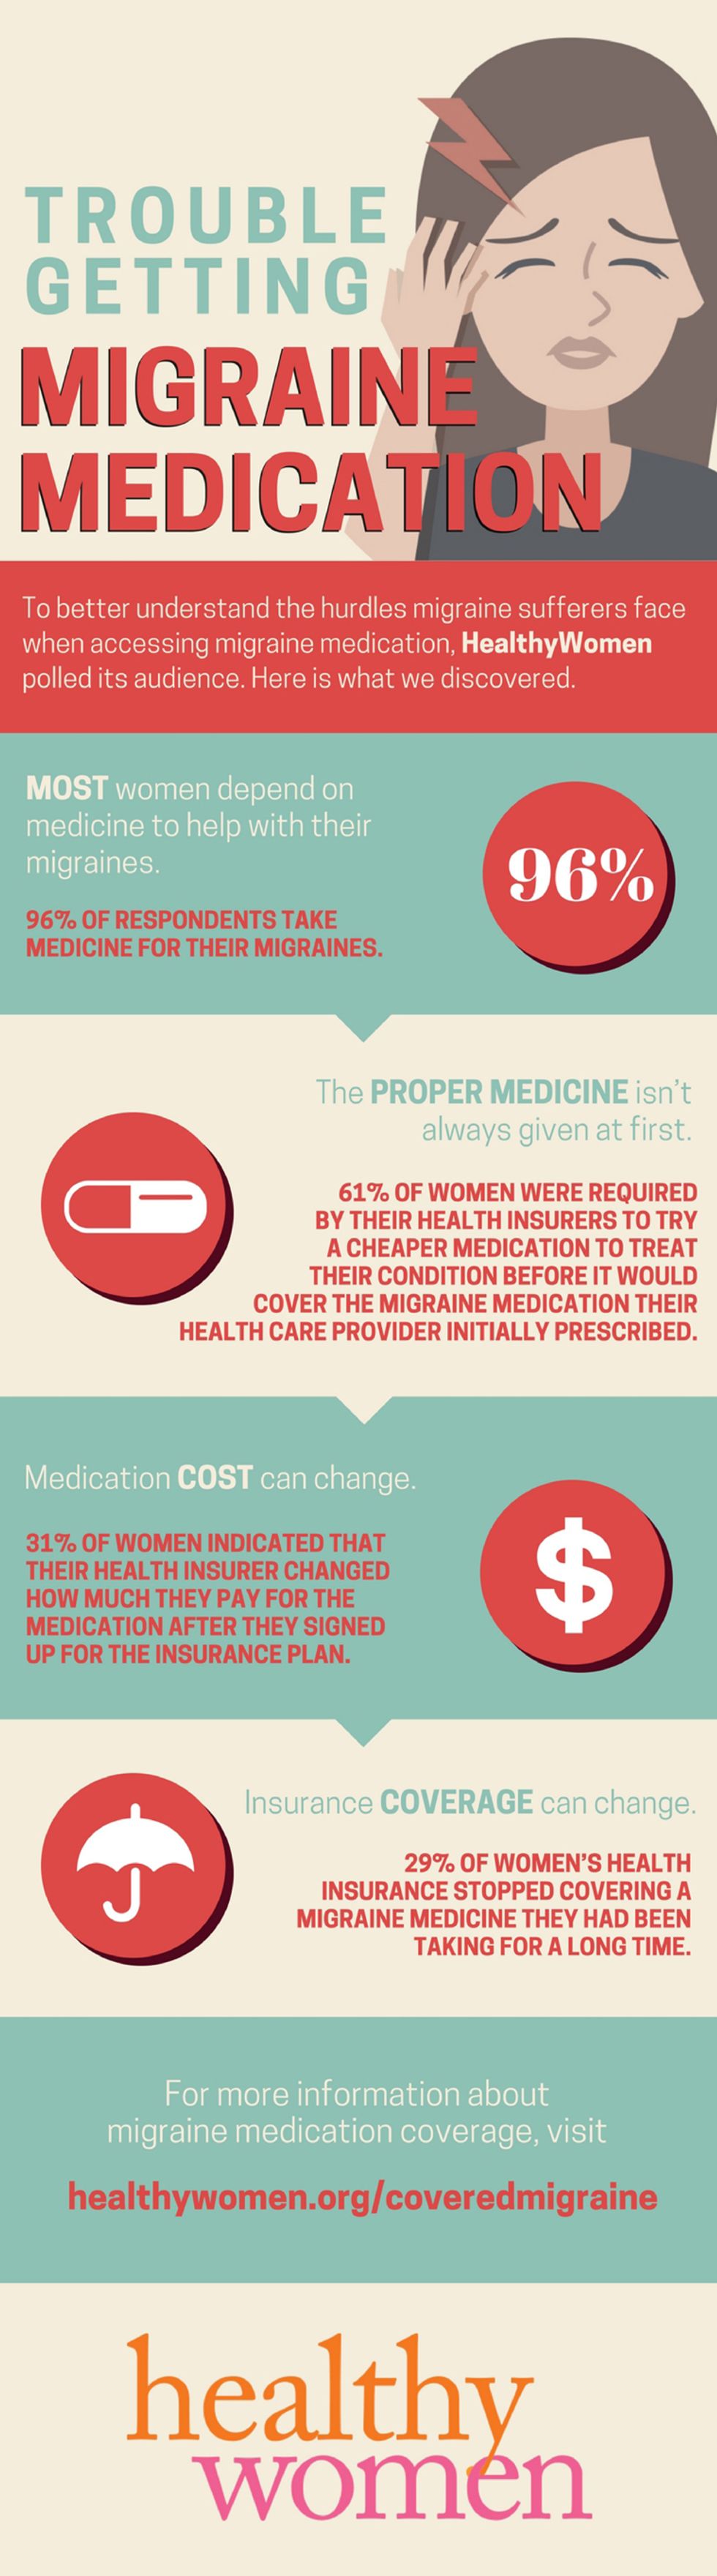 Trouble Getting Migraine Medication infographic